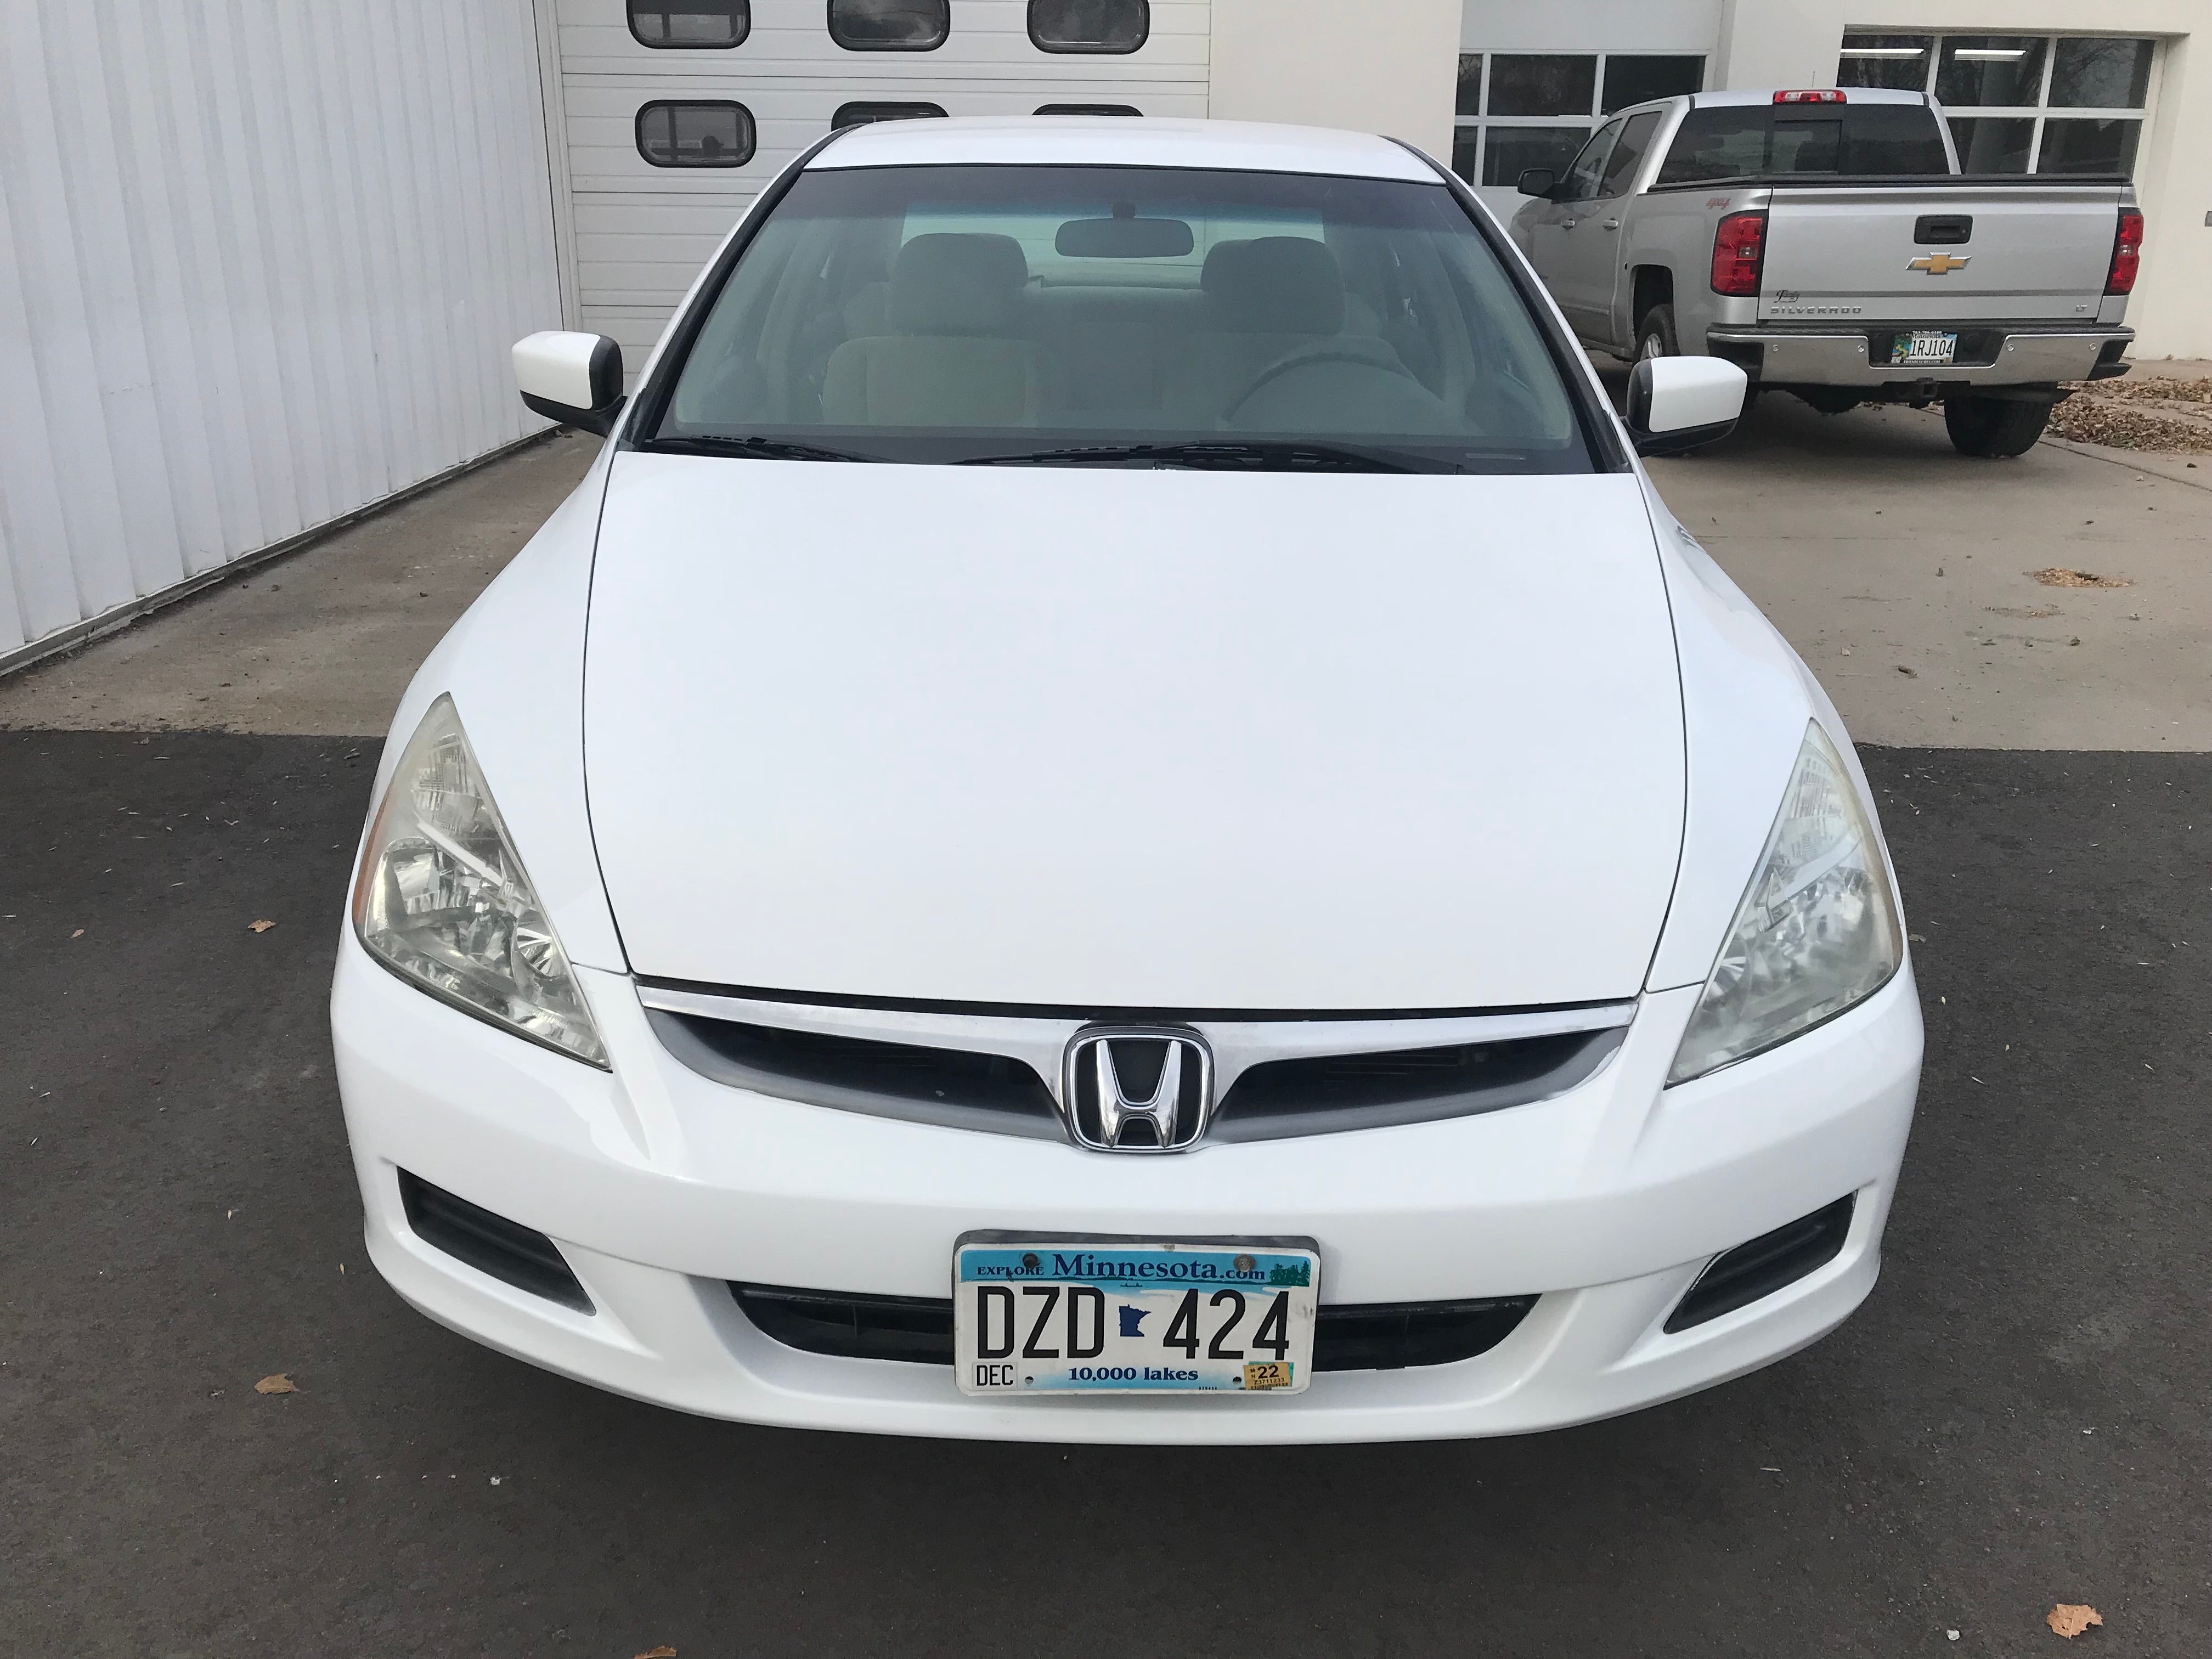 Used 2007 Honda Accord LX with VIN 1HGCM56497A016647 for sale in Arlington, Minnesota